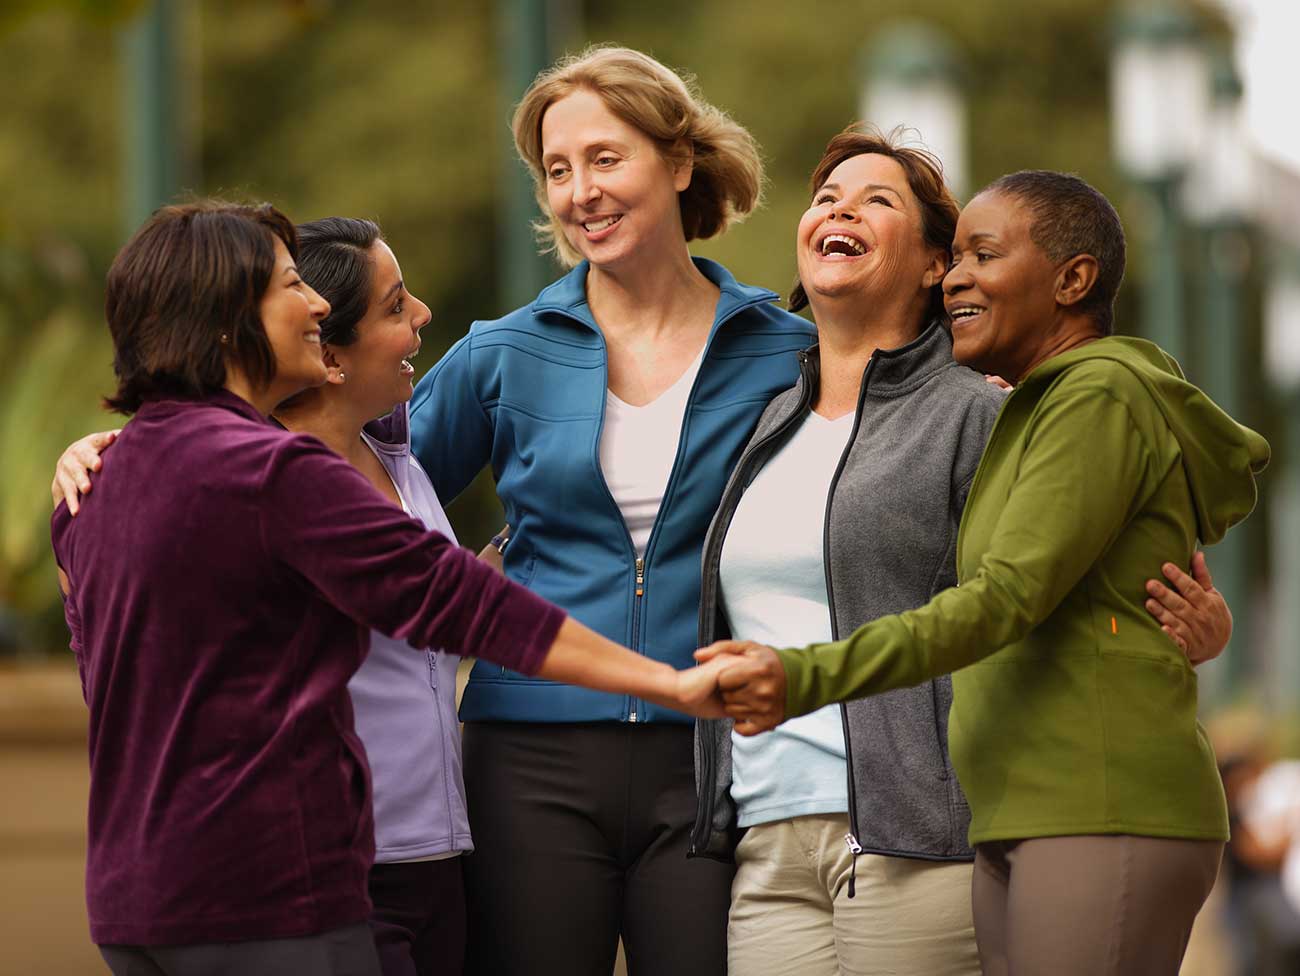 Group of 5 laughing women, standing in a circle with hands joined